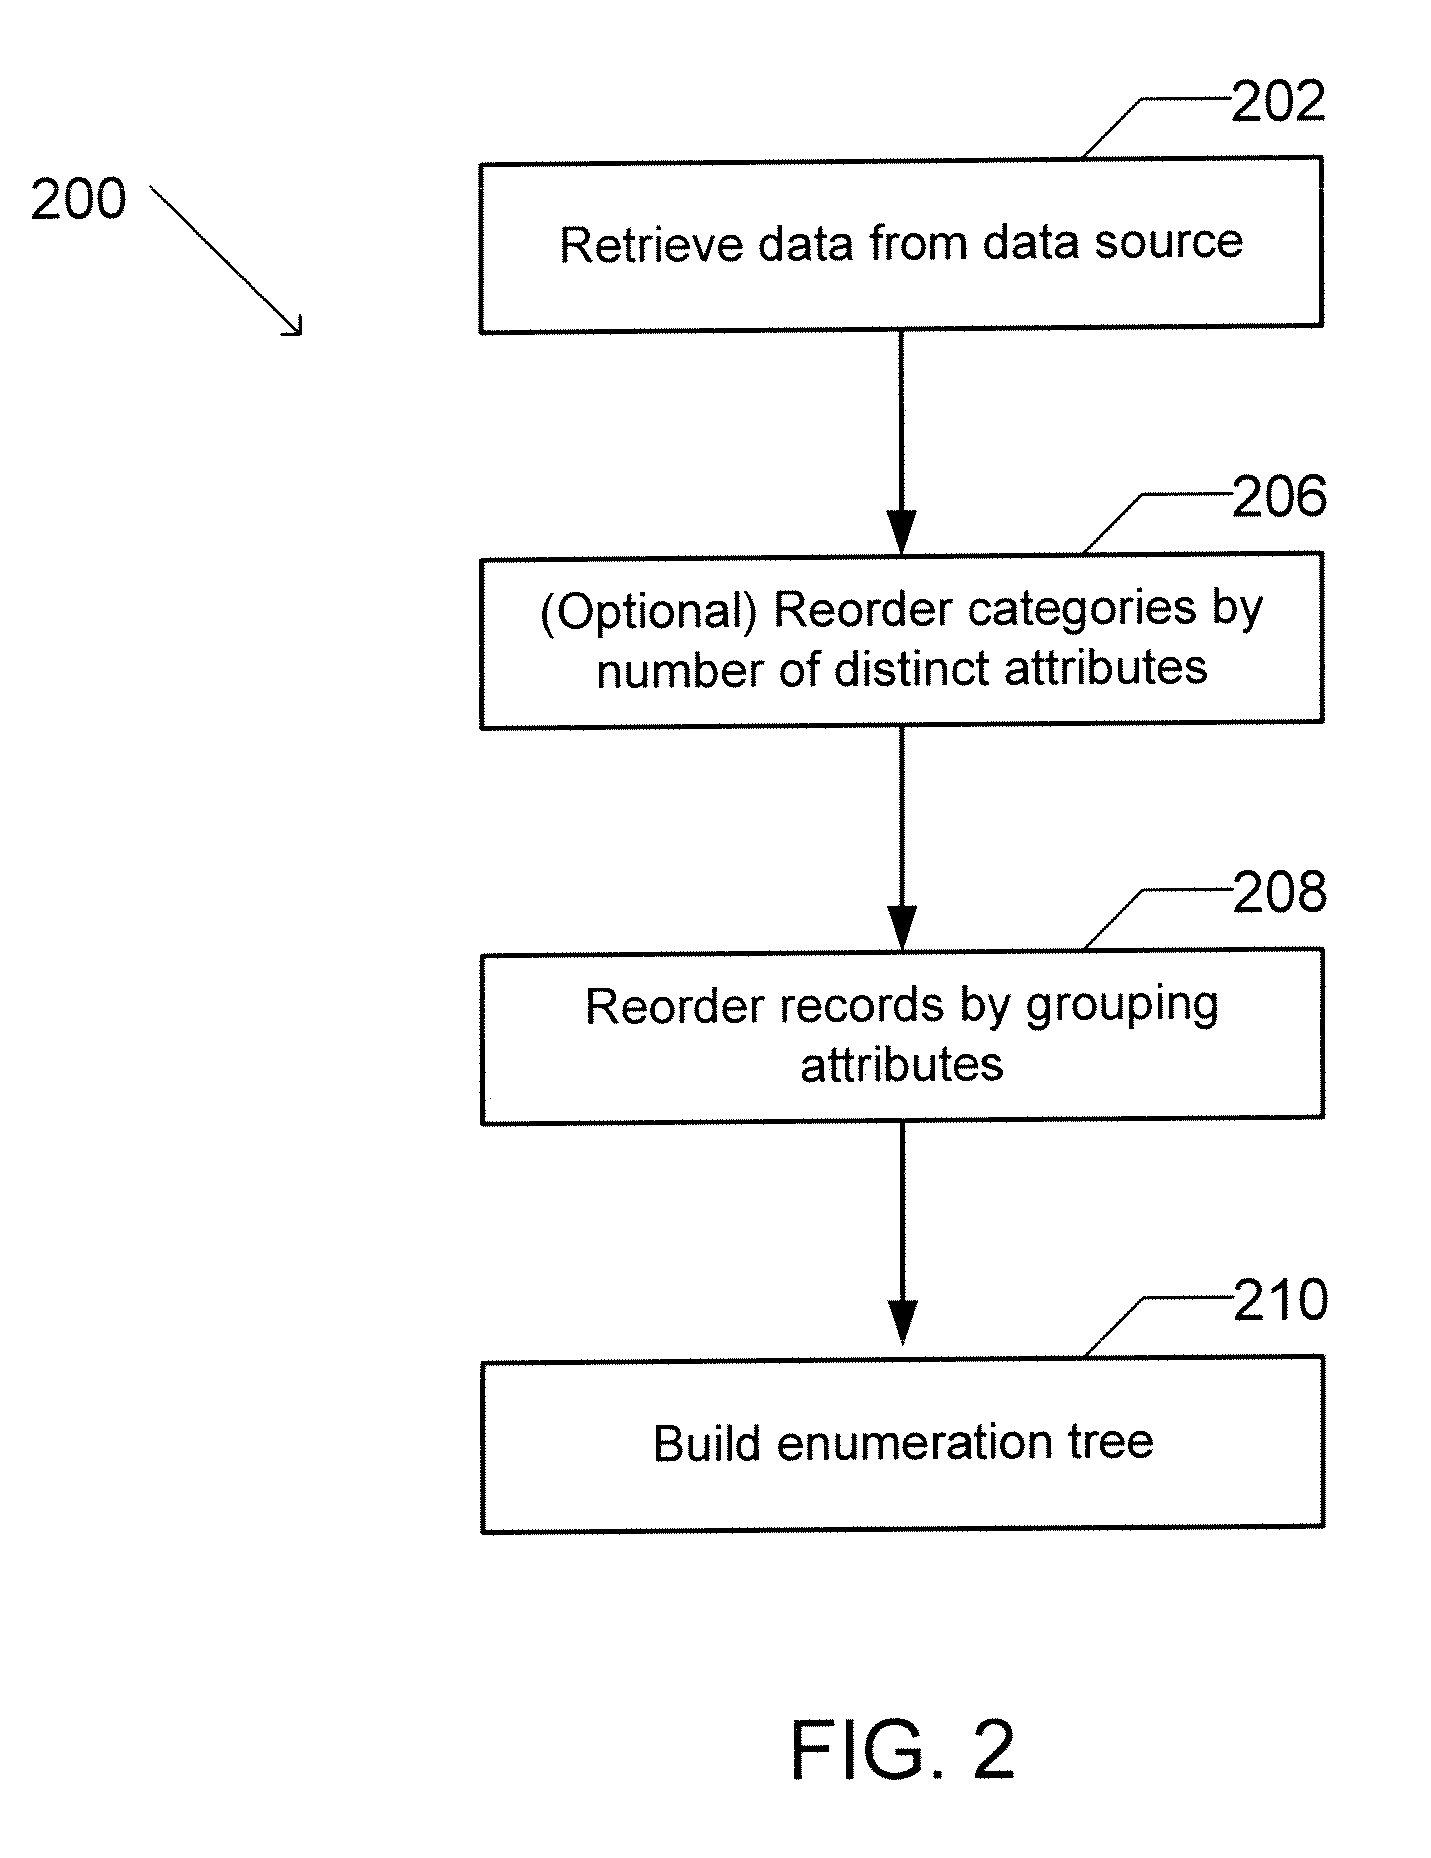 Apparatus and method for assessing relevant categories and measures for use in data analyses